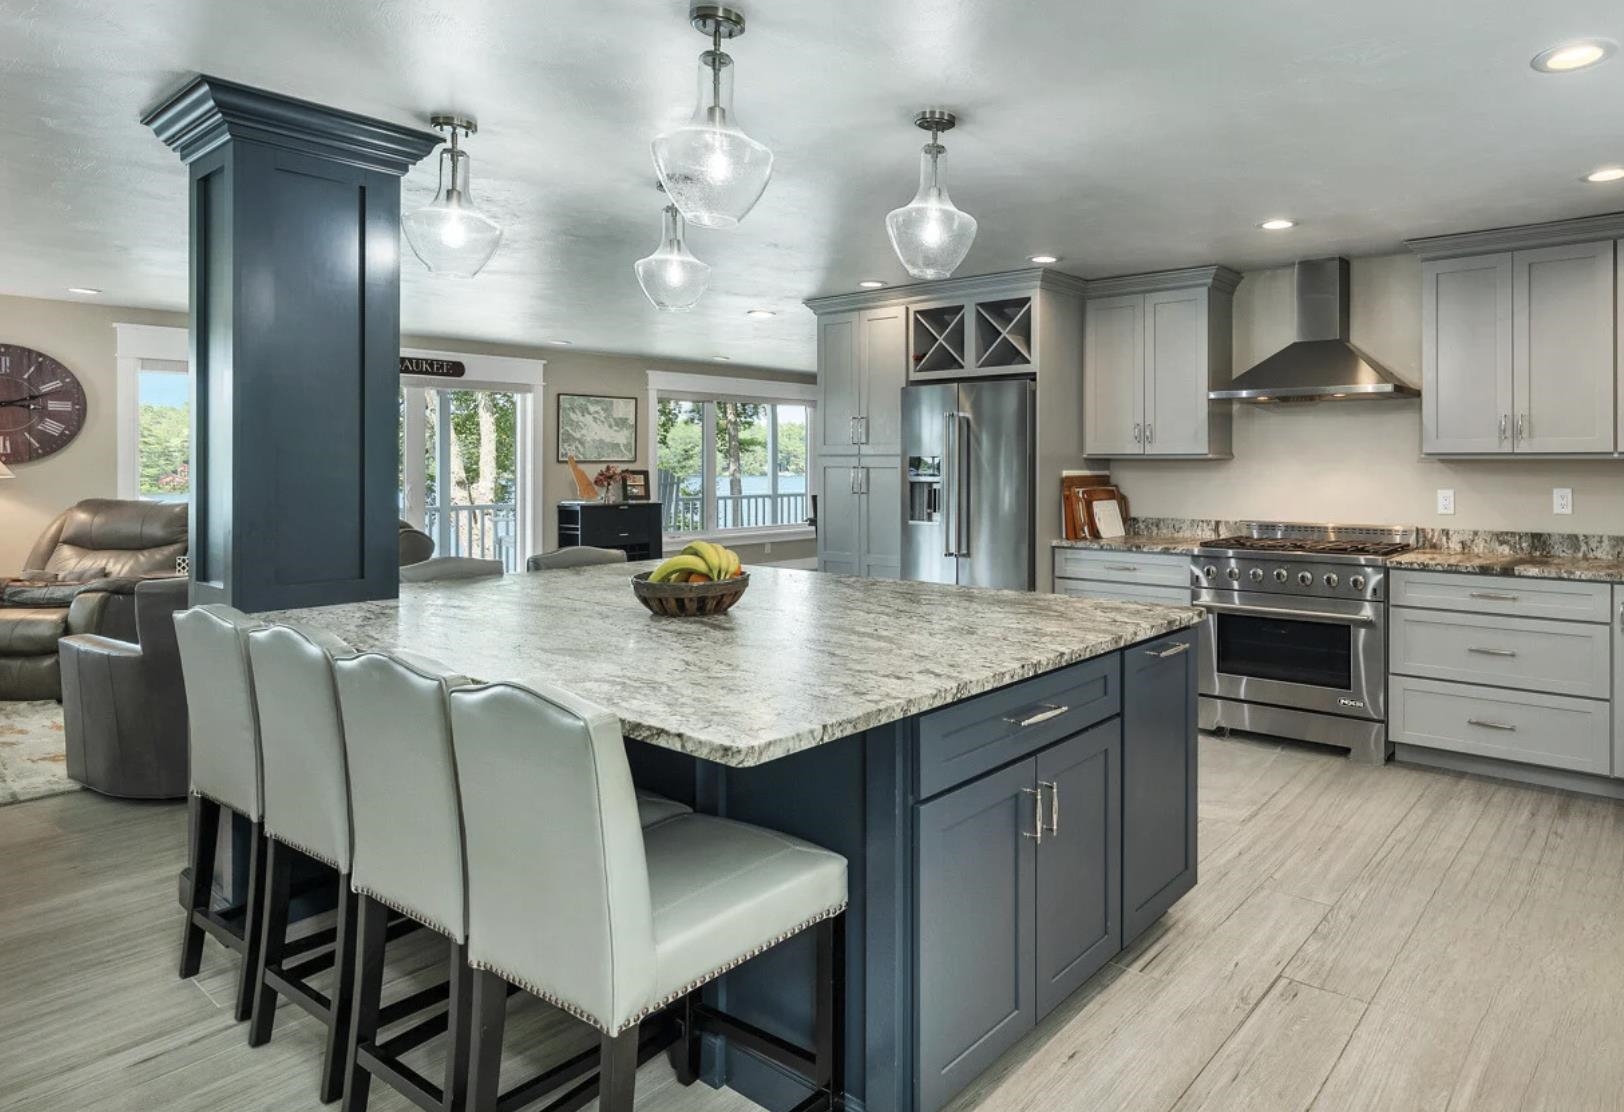 Perfect for entertaining, the main house's layout encourages gatherings, with an oversized leather granite island in the kitchen. New Viking stove